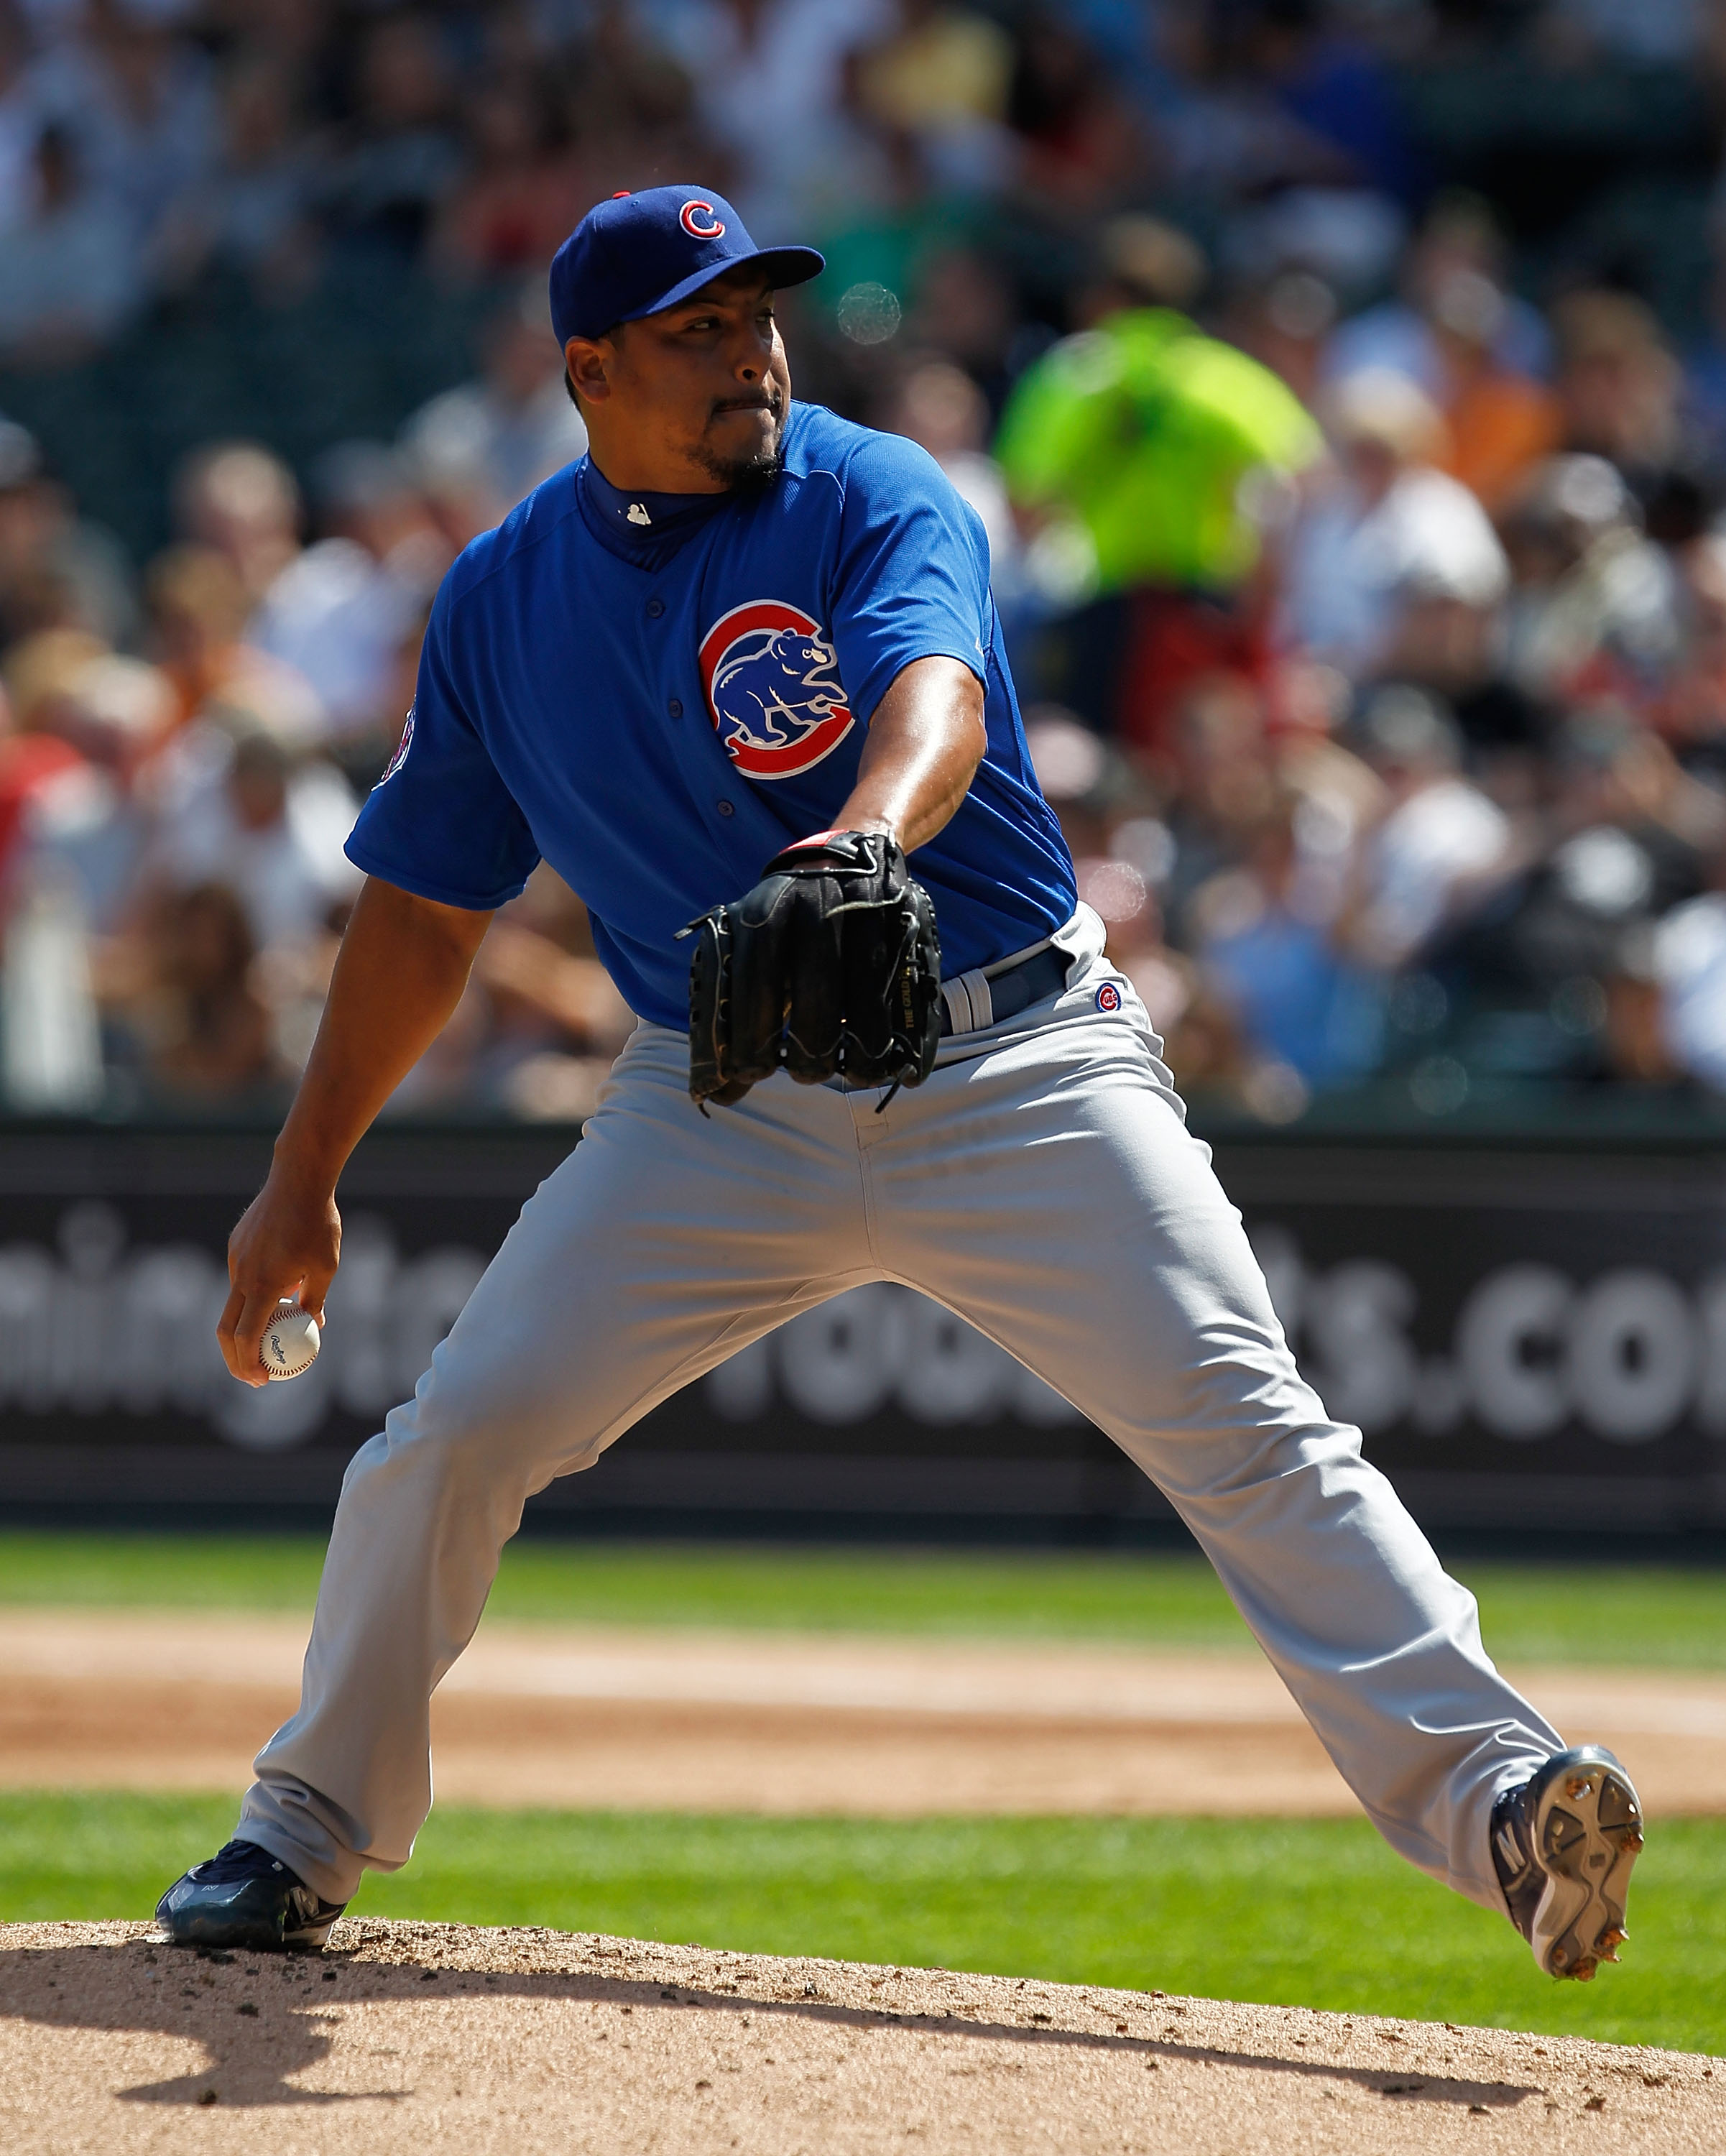 Carlos Zambrano Chicago Cubs Youth Royal Roster Name & Number T